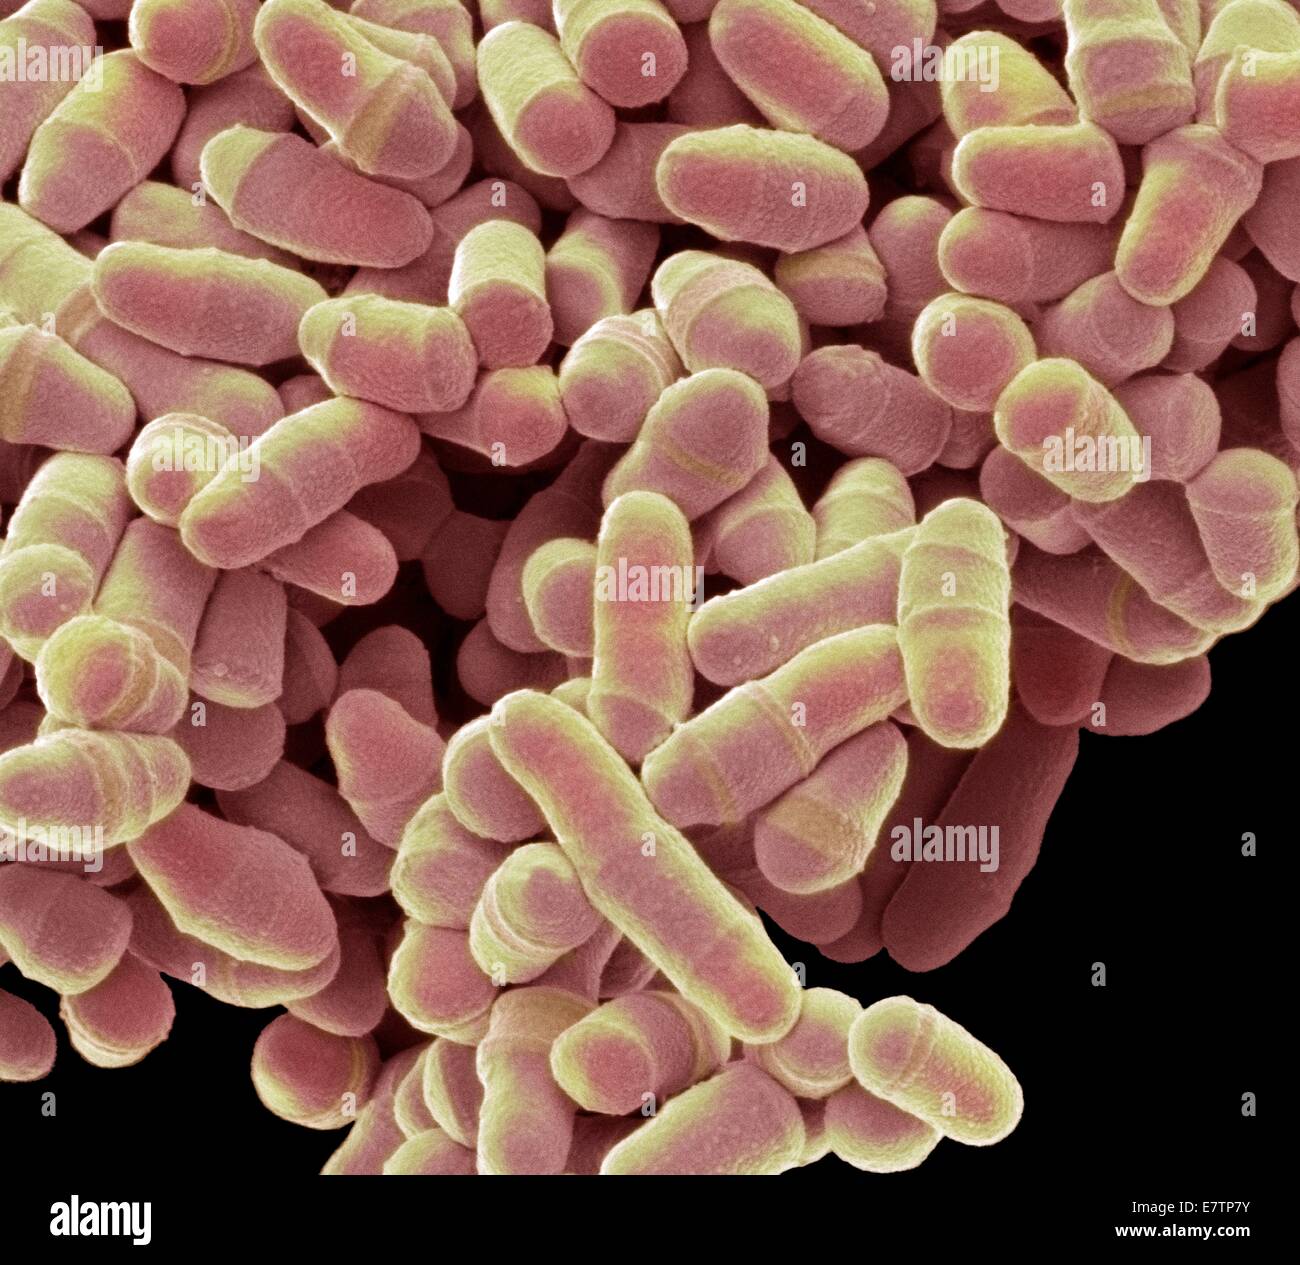 Coloured scanning electron micrograph (SEM) of Schizosaccharomyces pombe yeast. S. pombe is a single-celled fungus that is studied widely as a model organism for eukaryotic cell division. It is a rod-shaped yeast that grows by elongation at its ends. It r Stock Photo